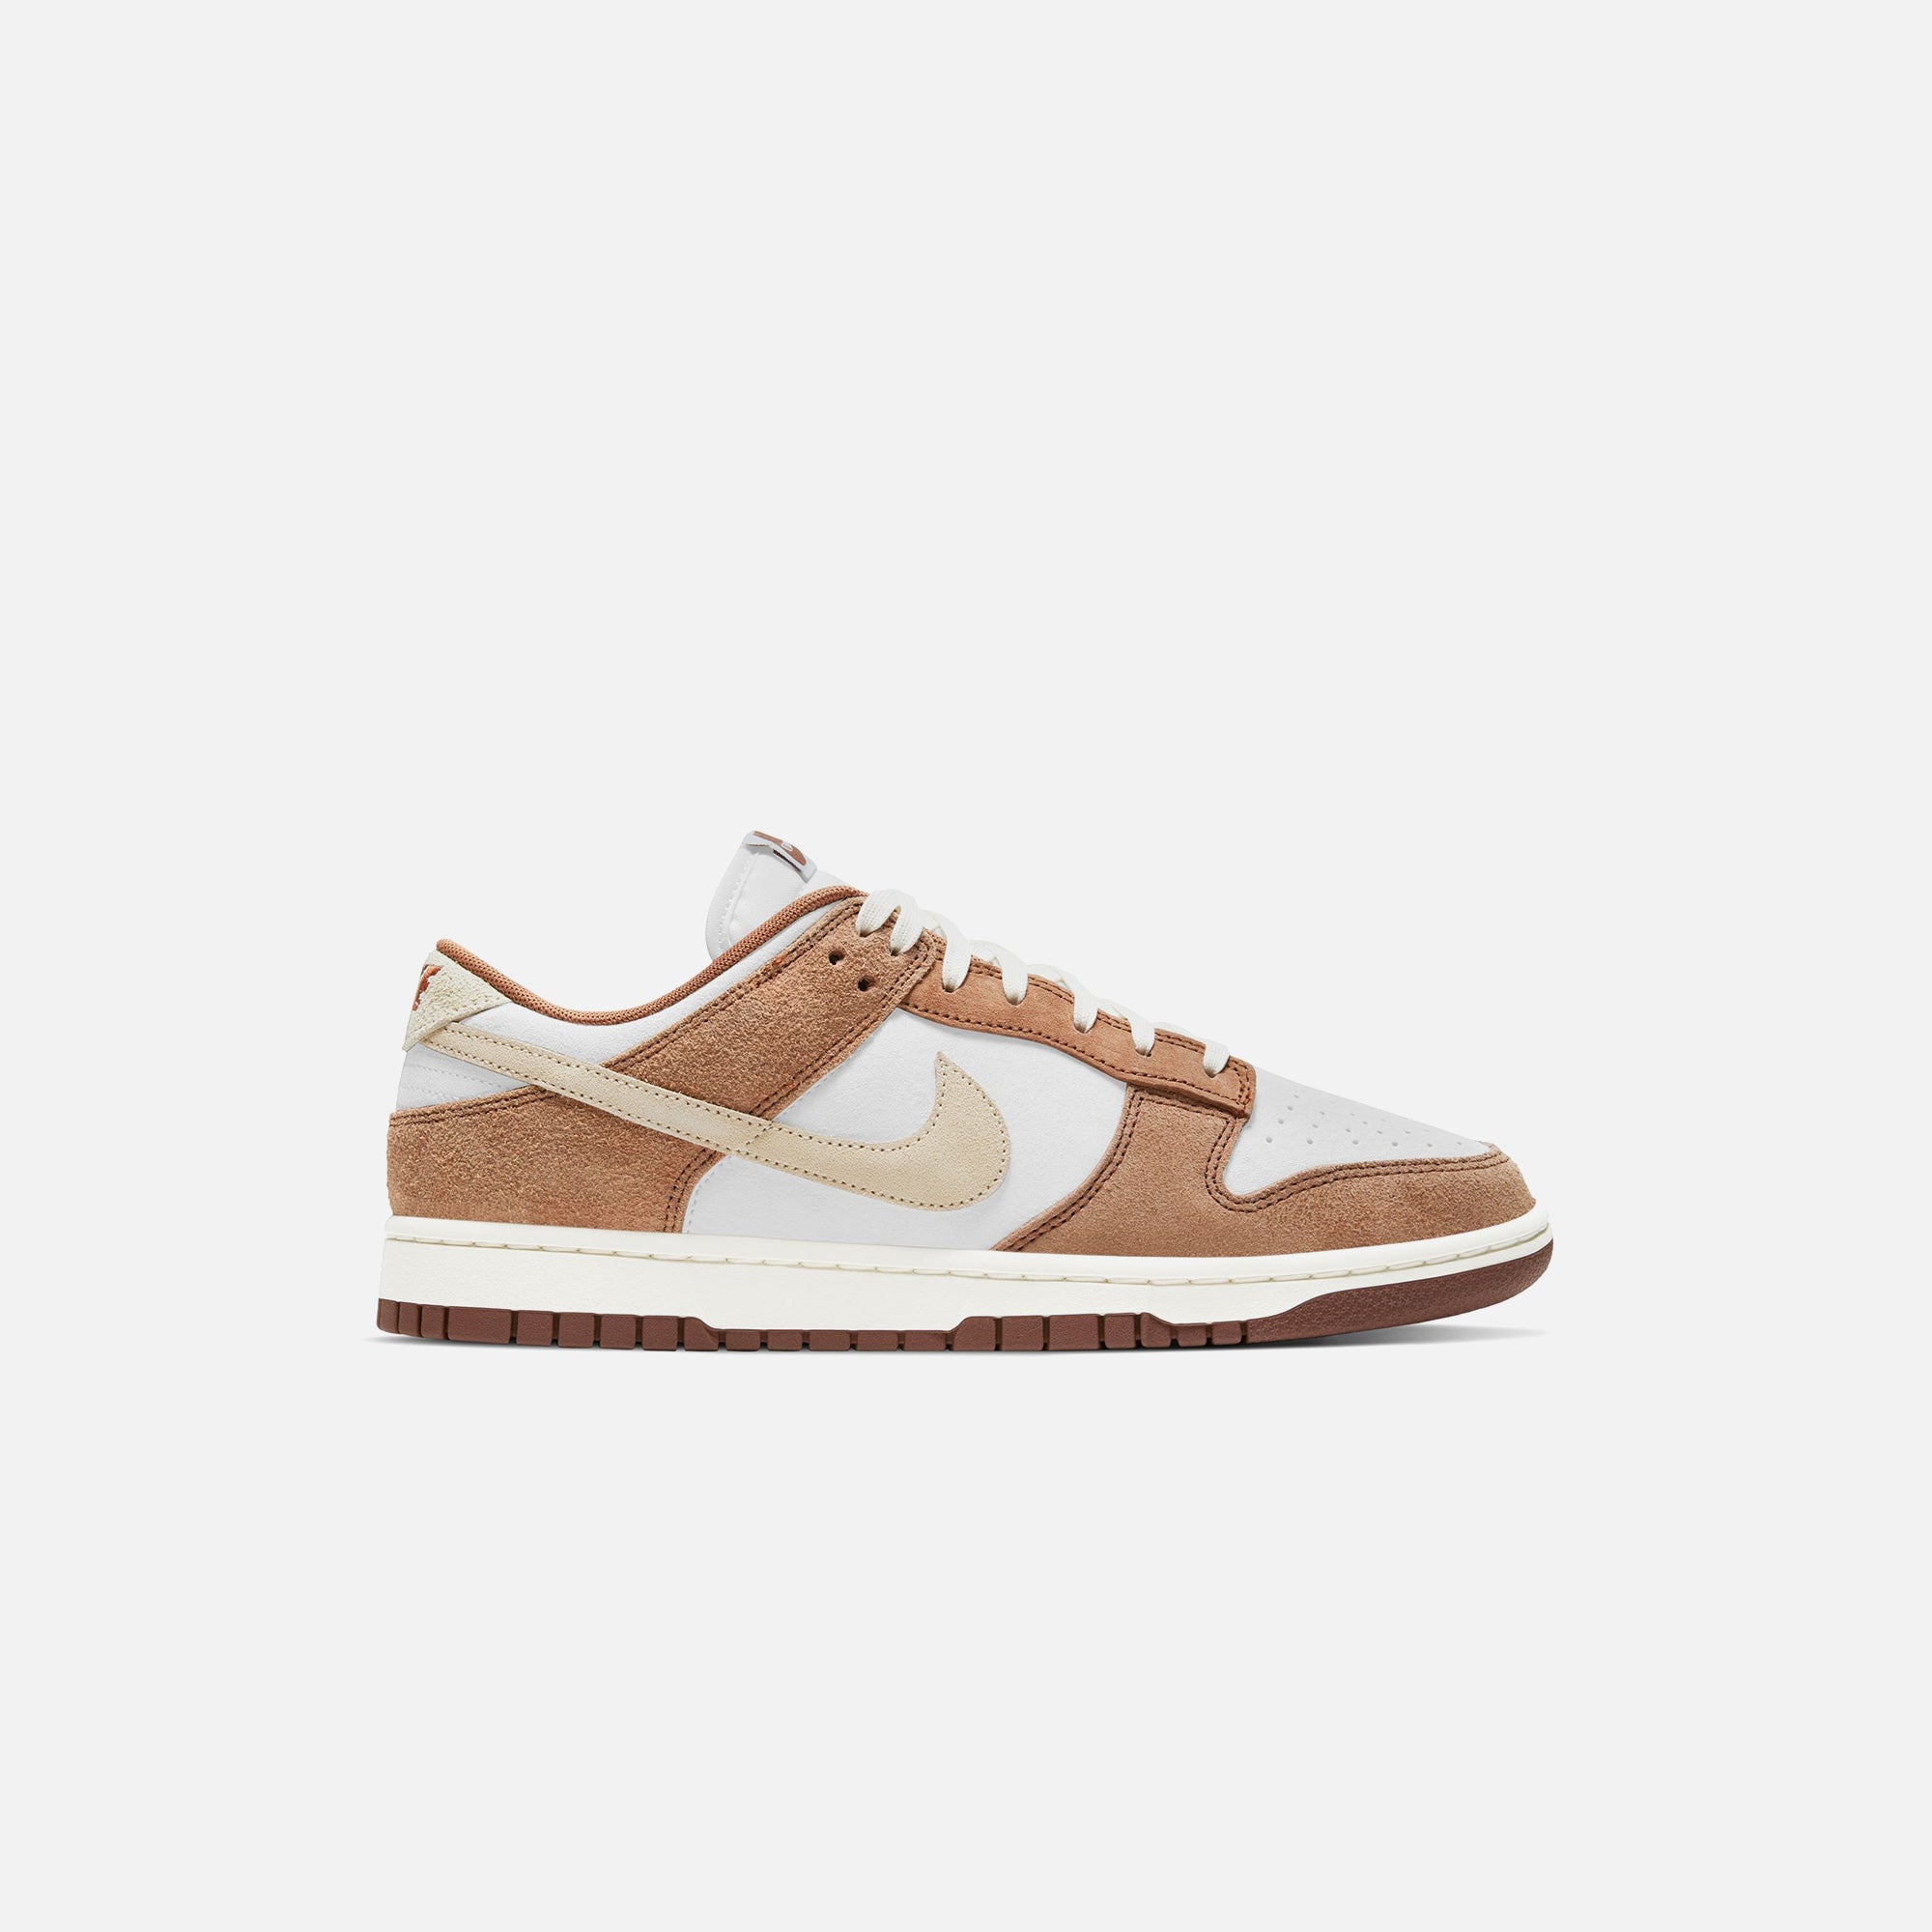 Nike Dunk Low Retro PRM - Sail / Fossil / Med Curry – Kith